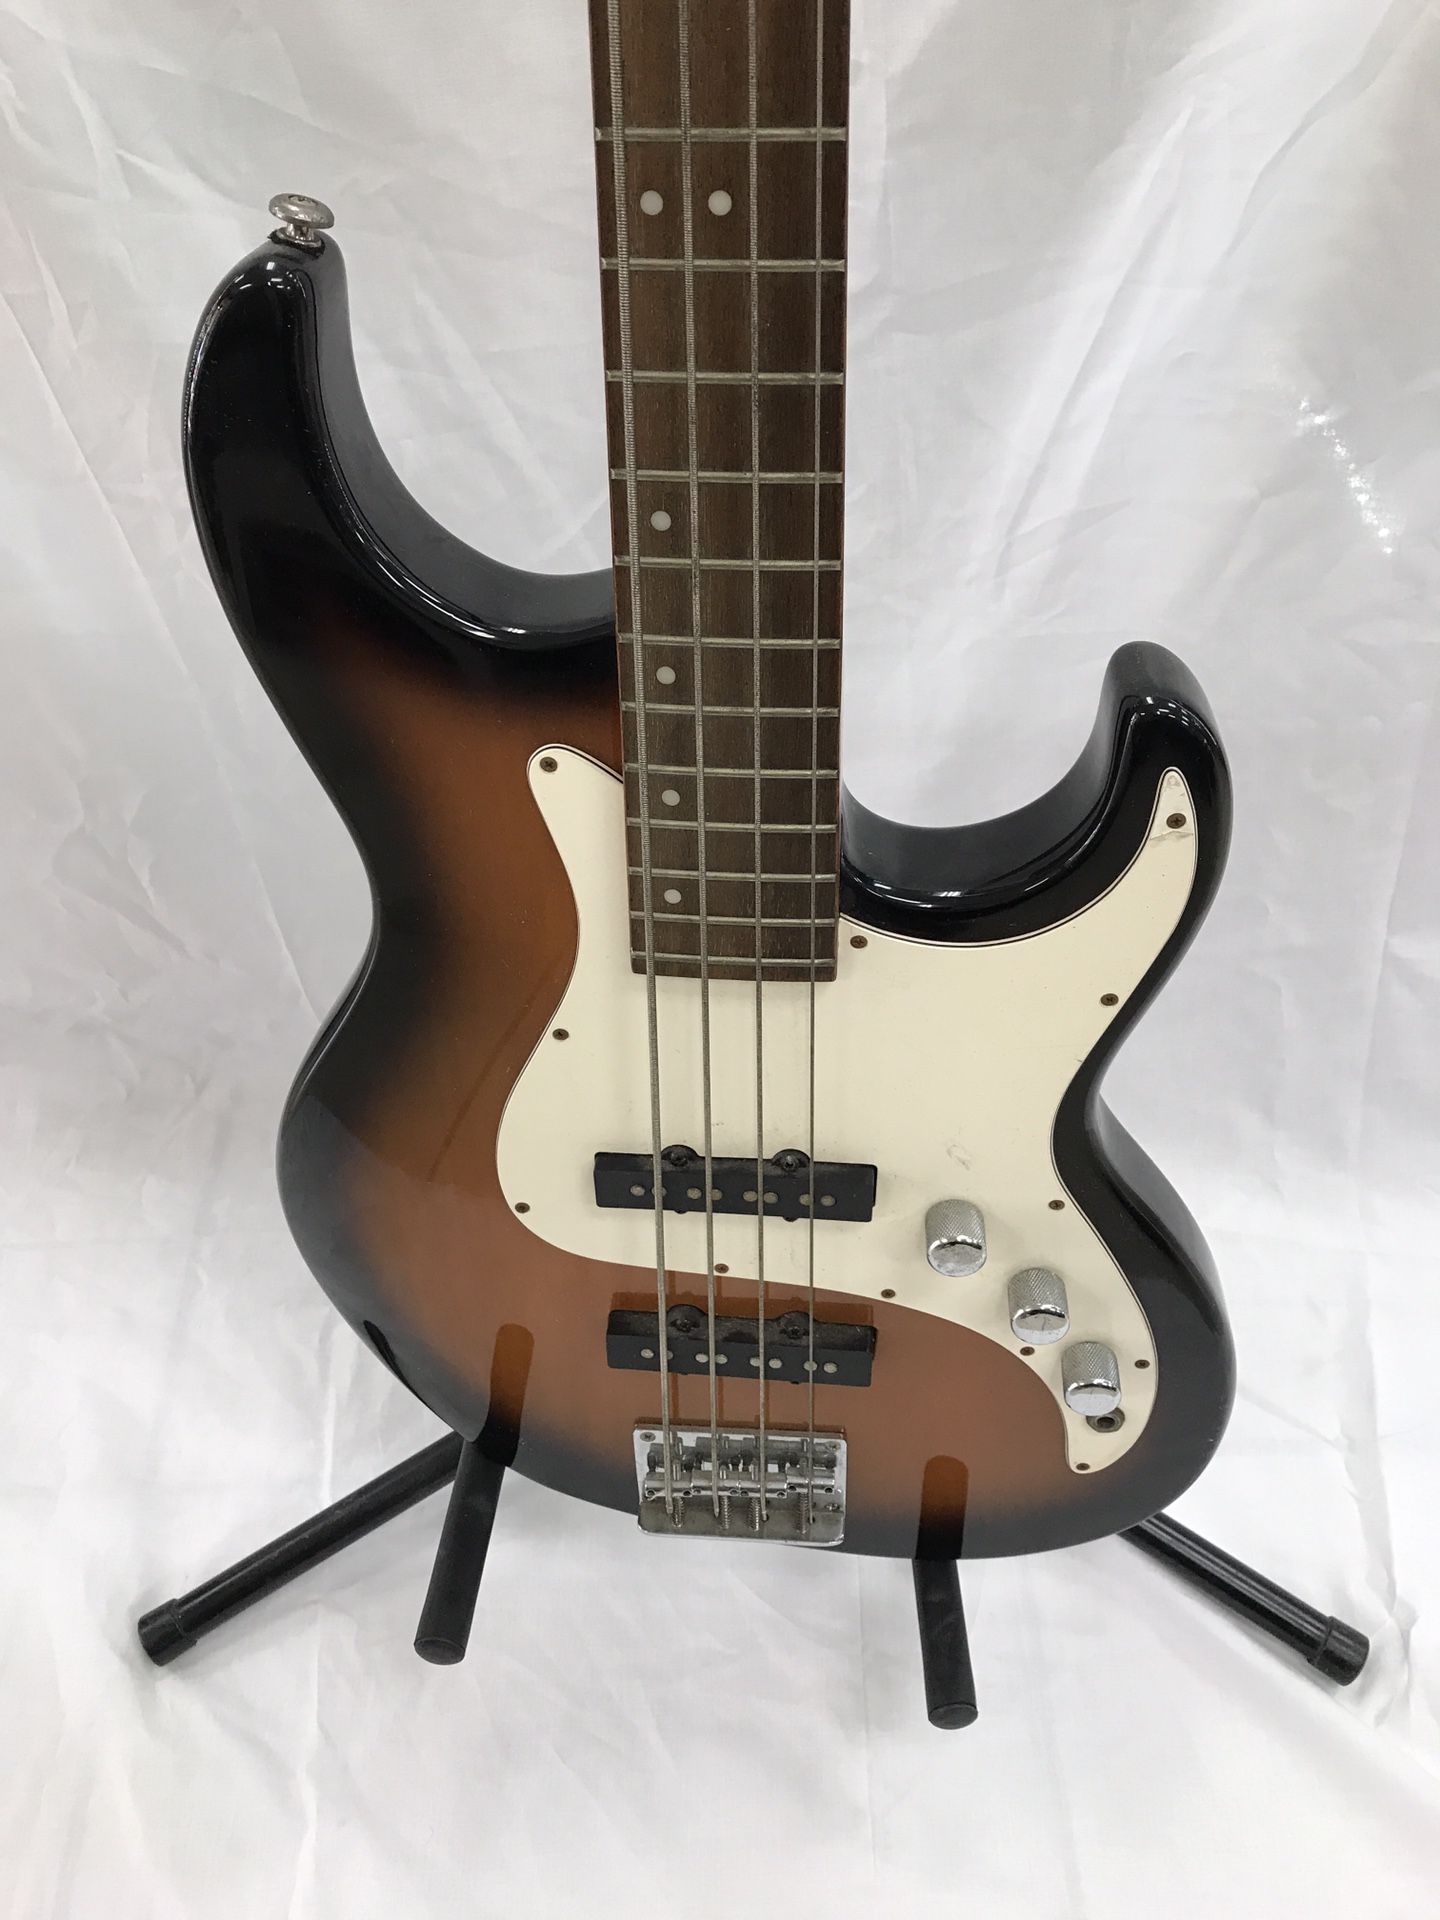 FAIRLANE BASS Guitar Grey Bennet In Great Condition